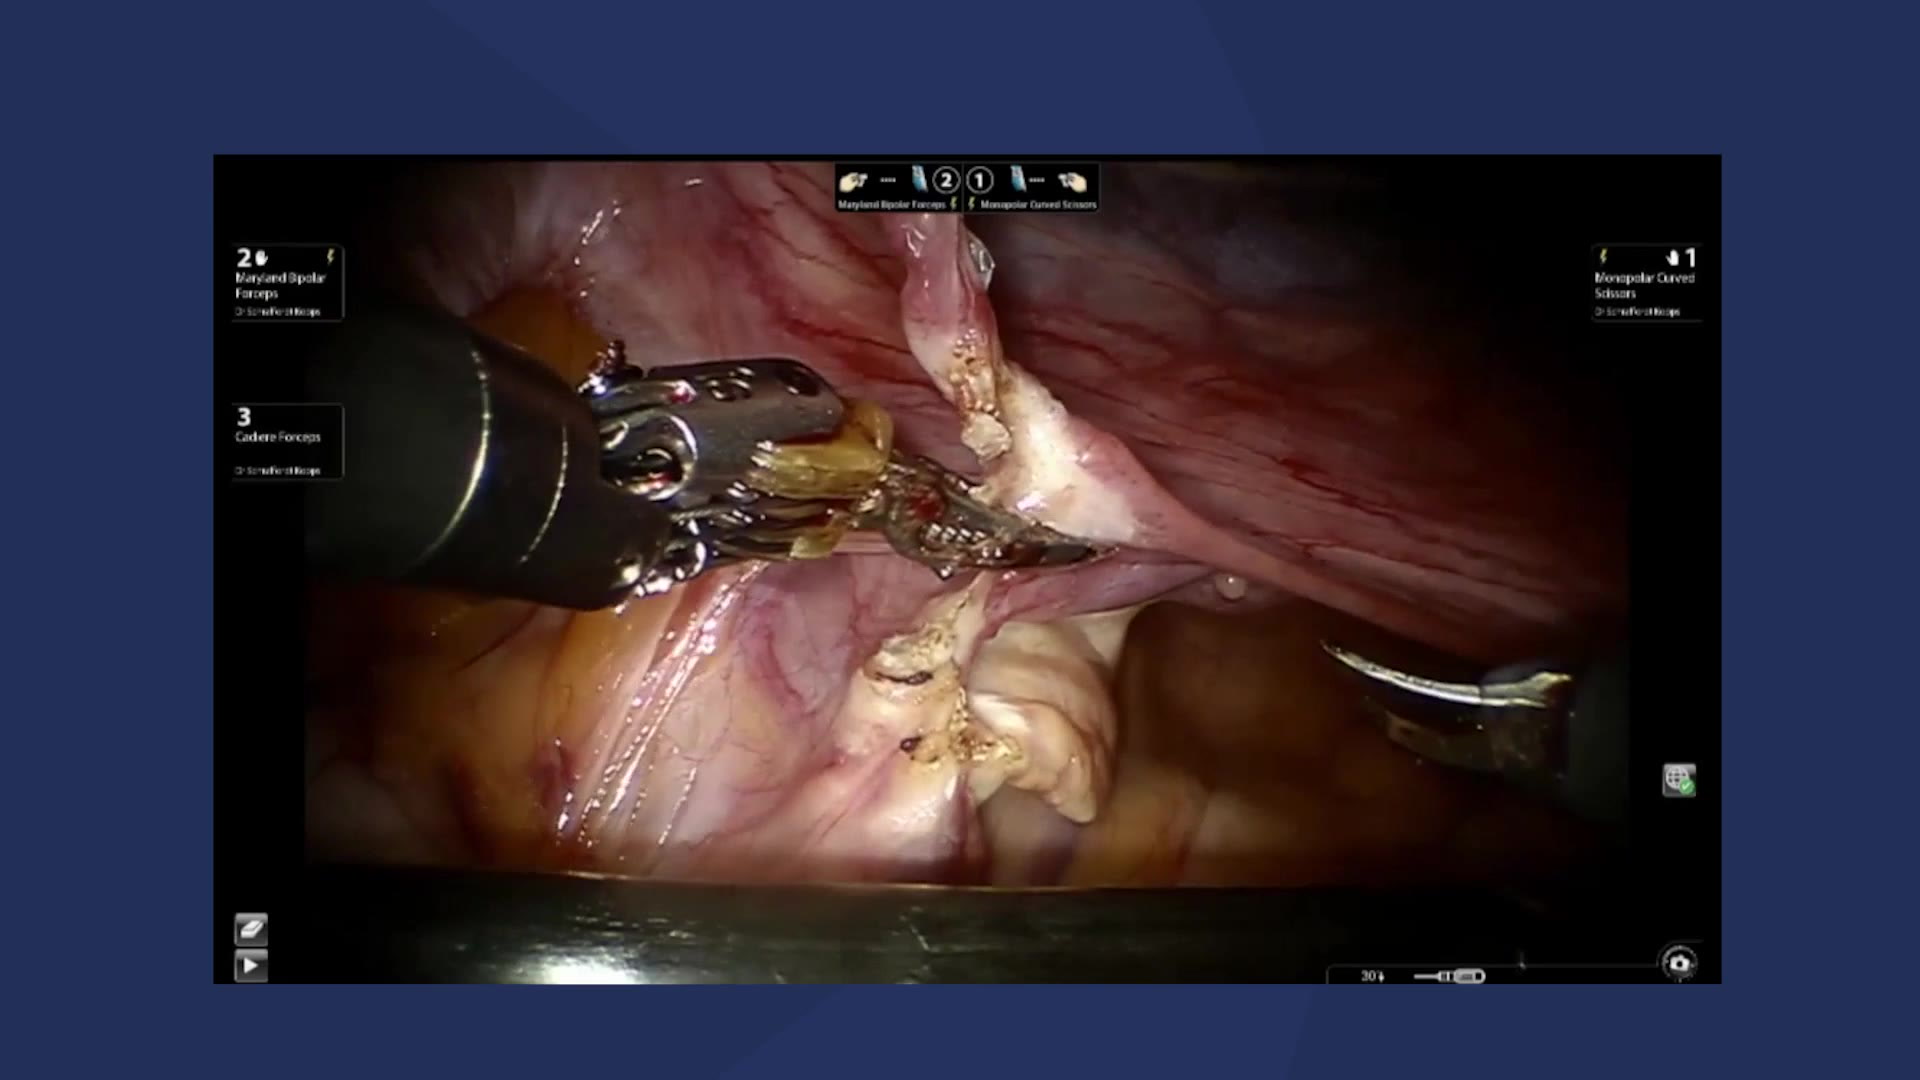 Robot-assisted supravaginal hysterectomy and ventral rectopexy with cervicopexy